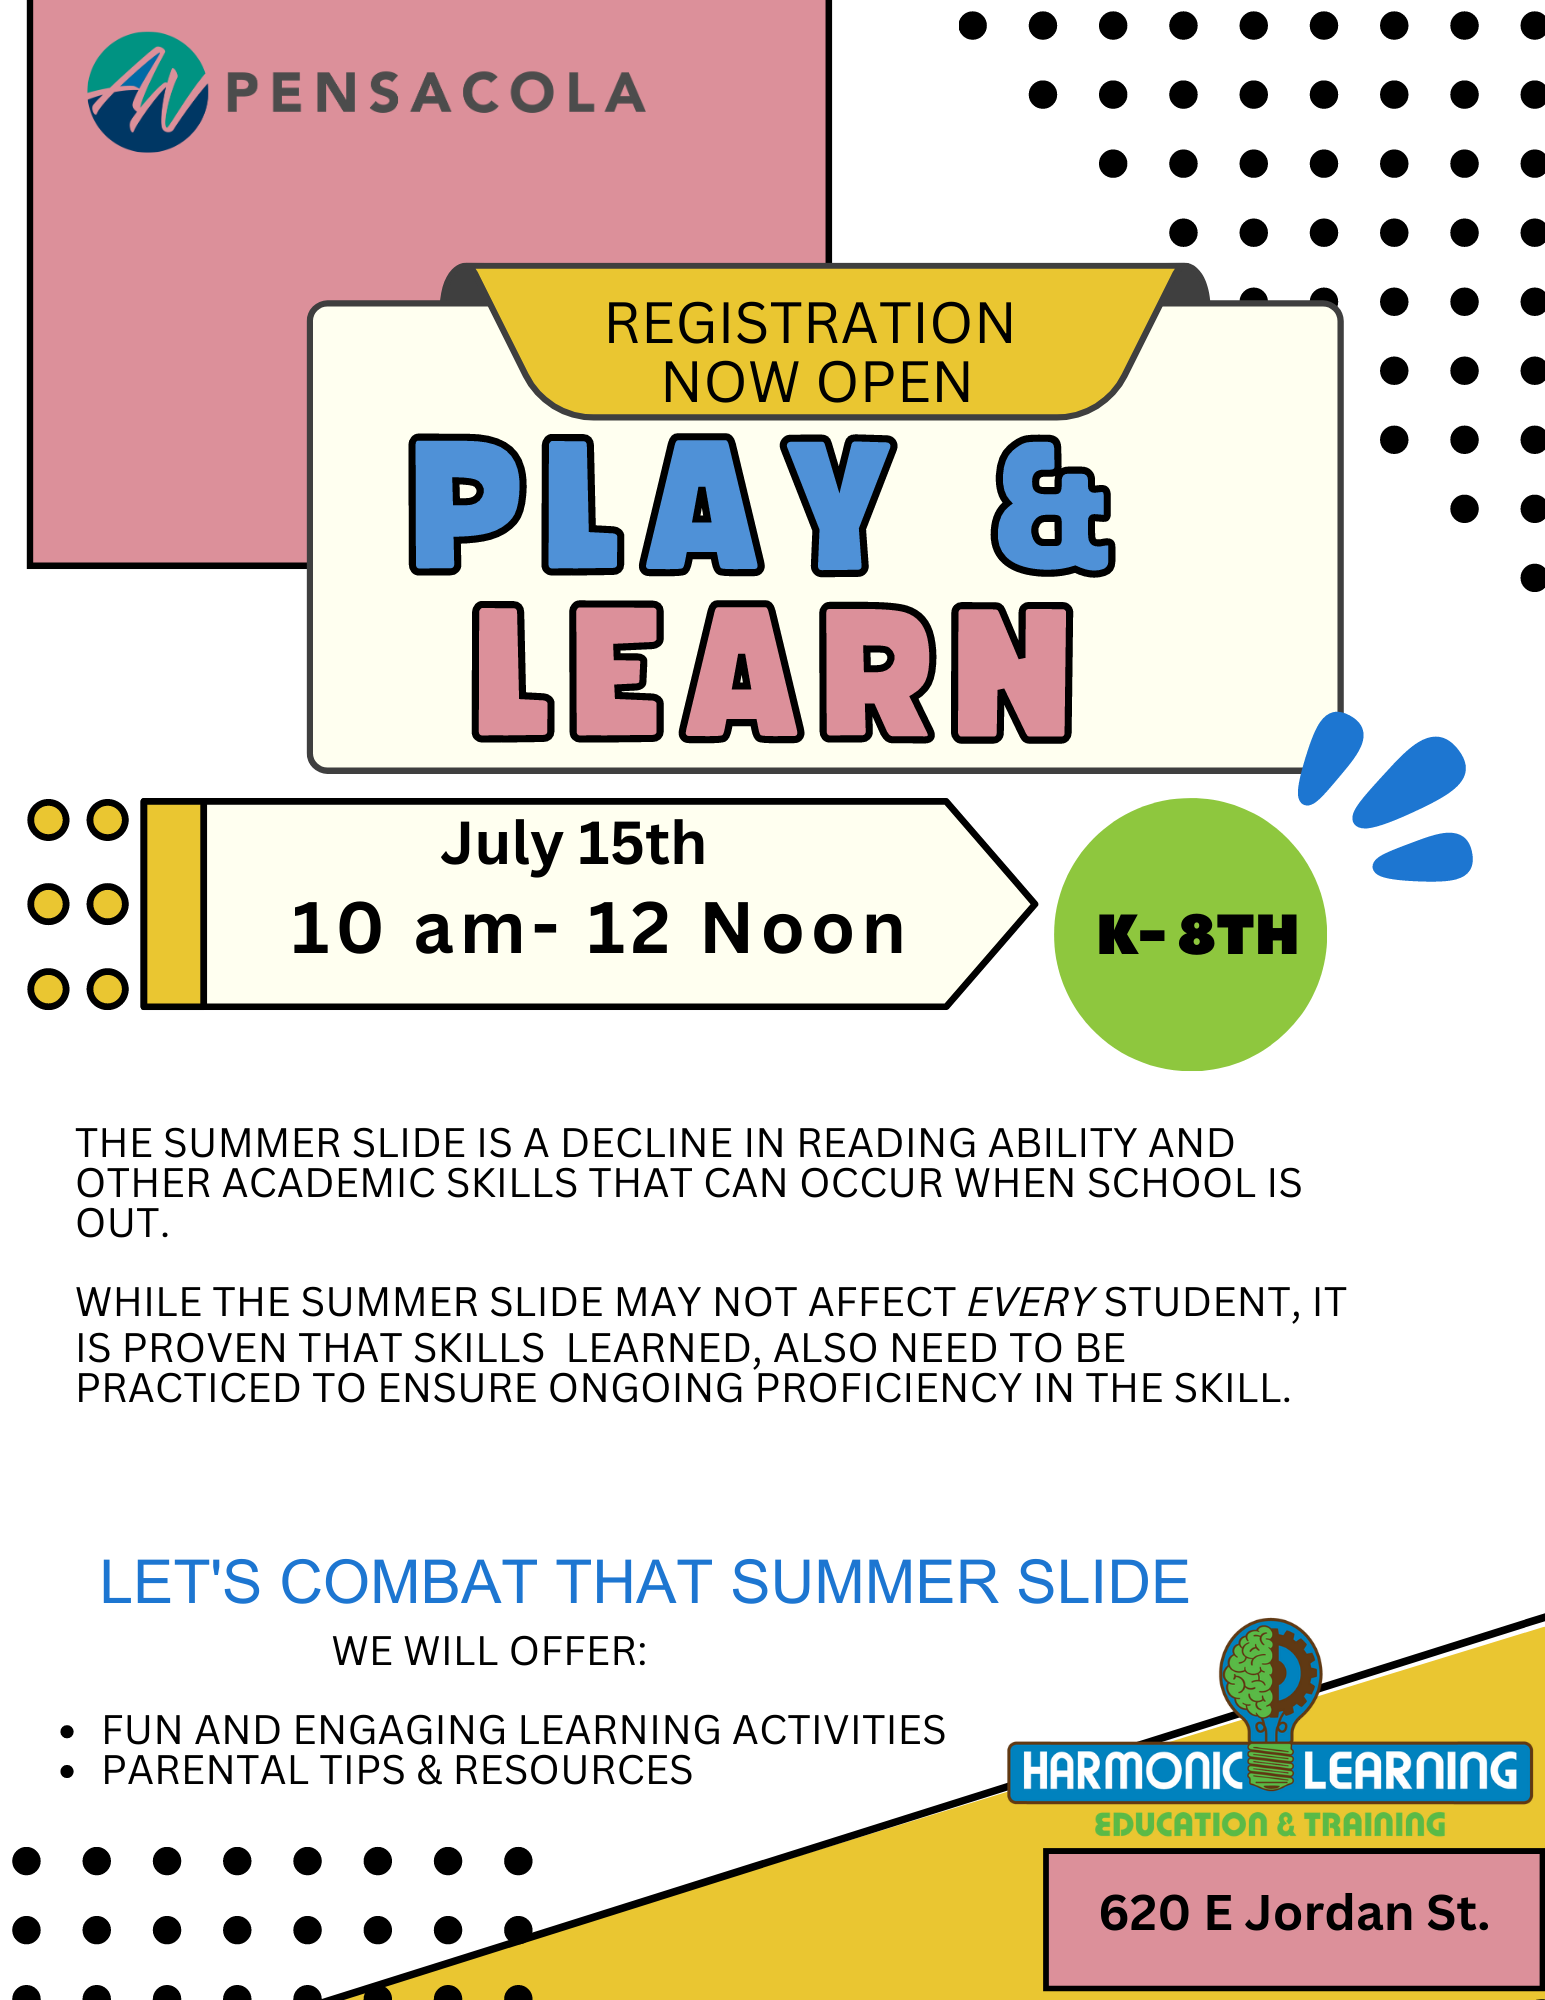 Play & Learn Summer Reading Education Booster @ Harmonic Learning Education & Training Center July 15th @ 10am